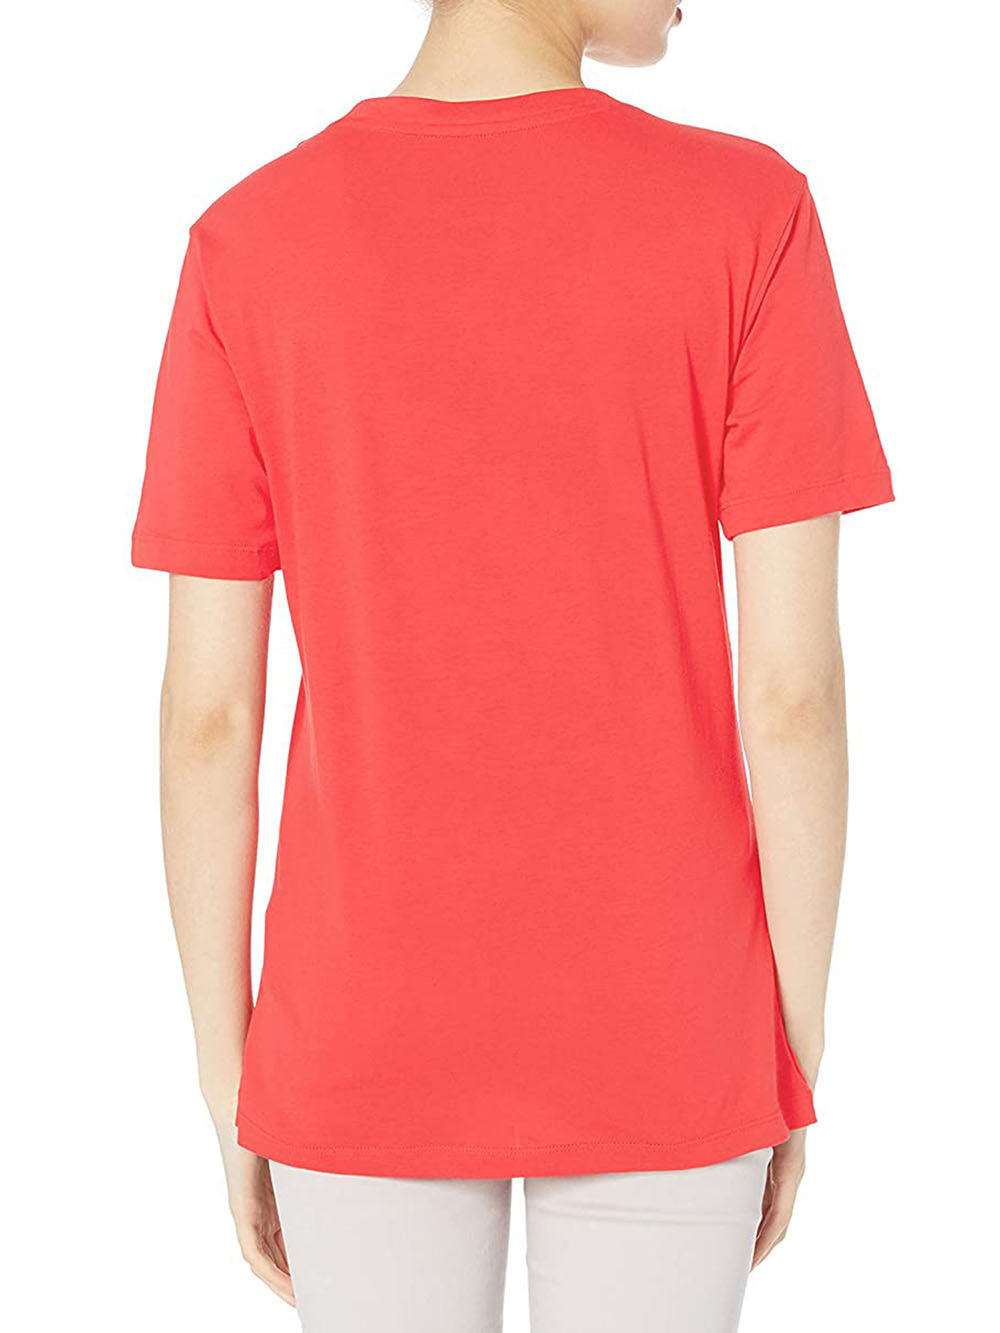 Armani Exchange T-shirt Donna Rosso